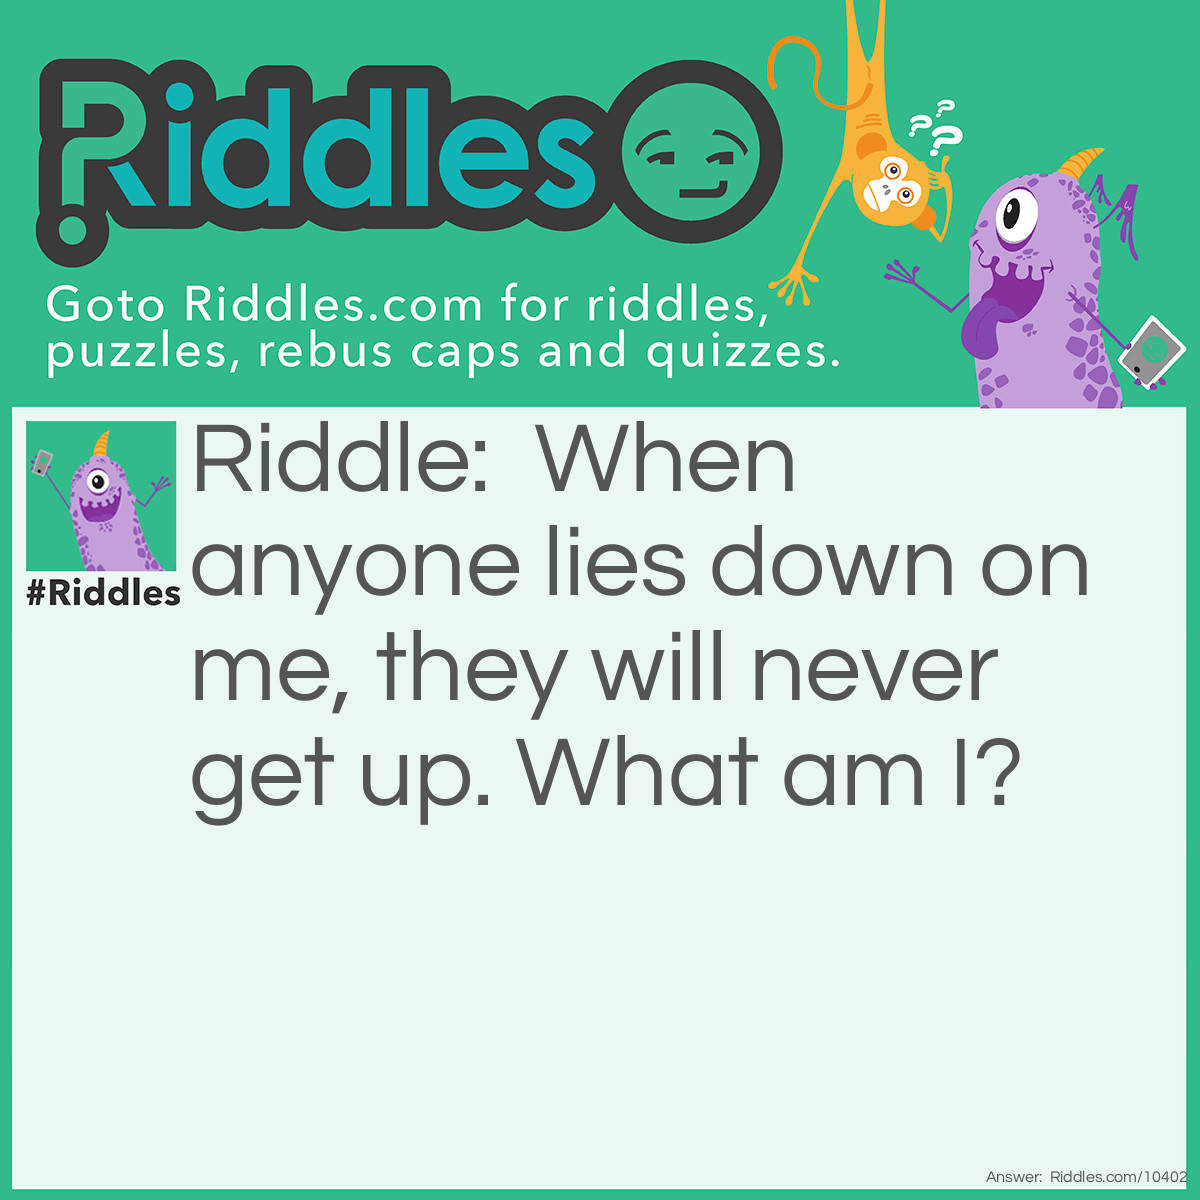 Riddle: When anyone lies down on me, they will never get up. What am I? Answer: A coffin!